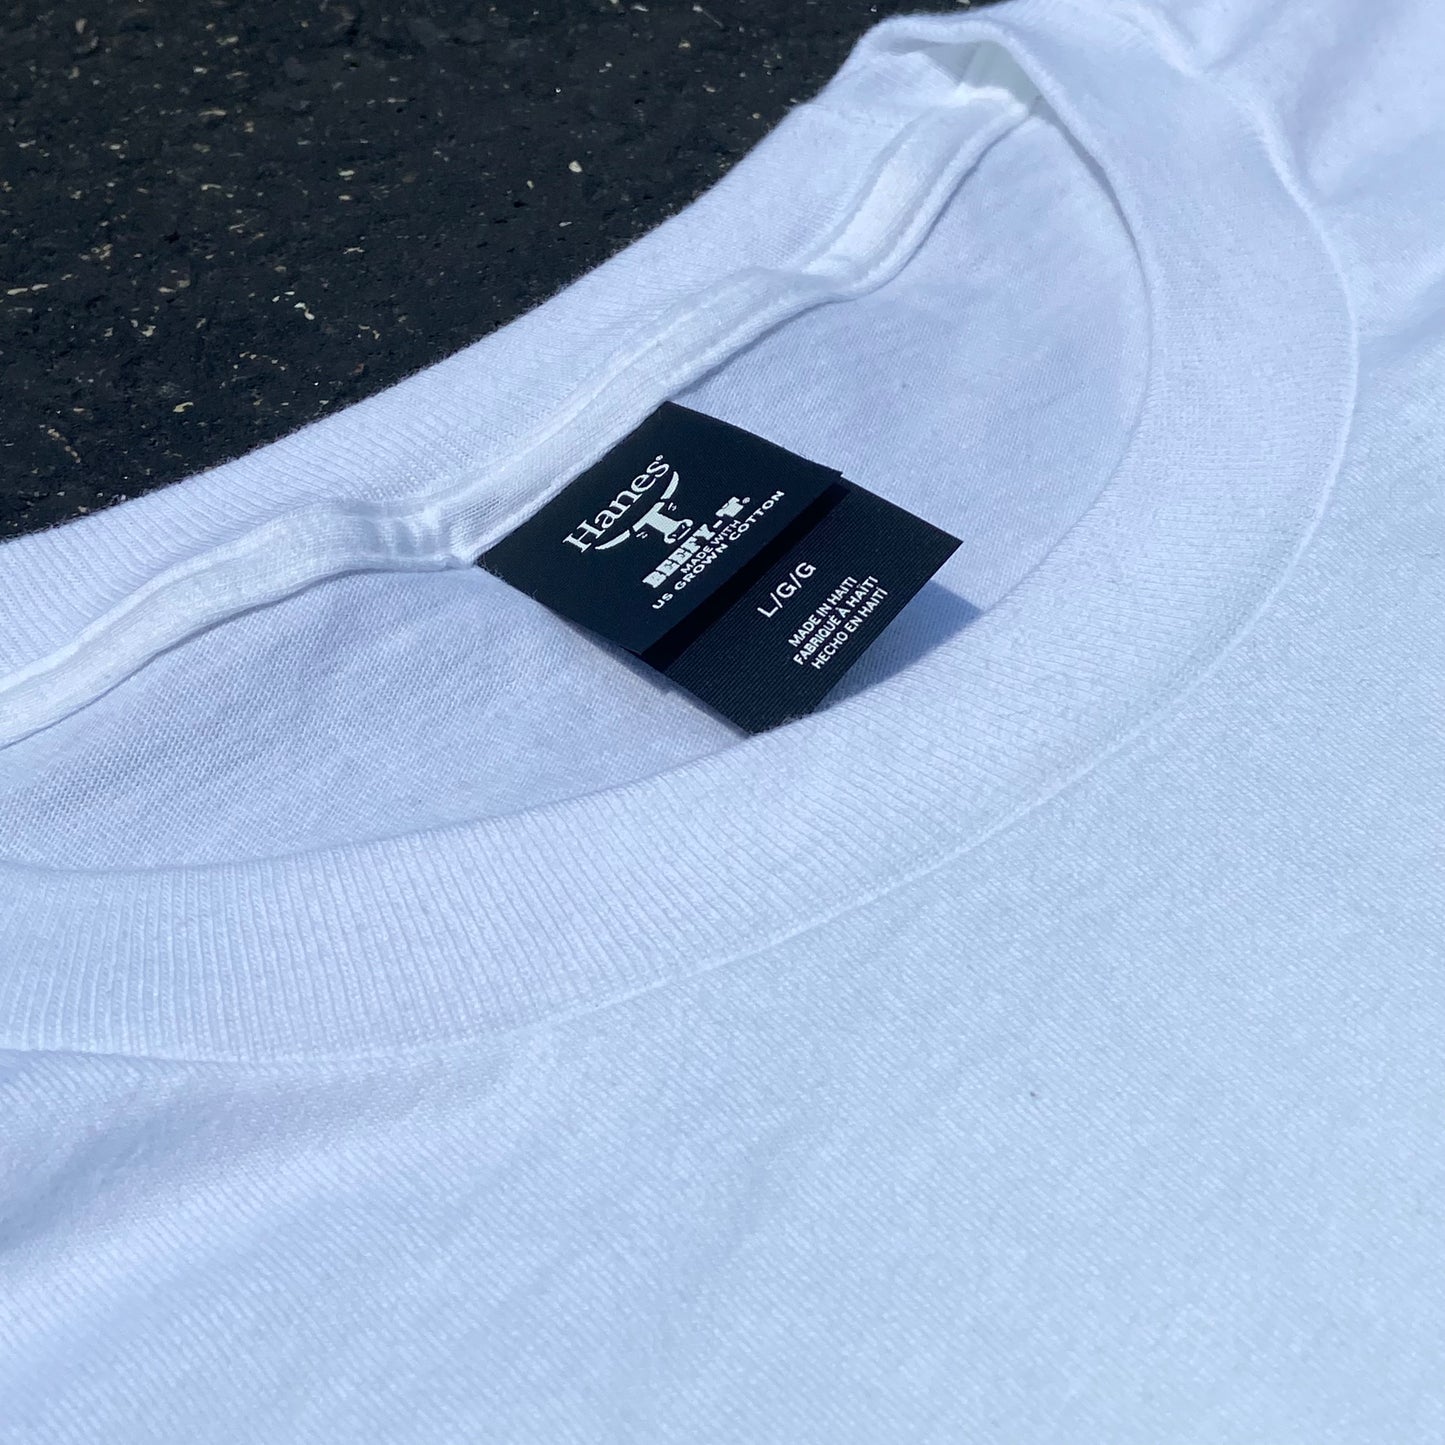 On the Road White Tee